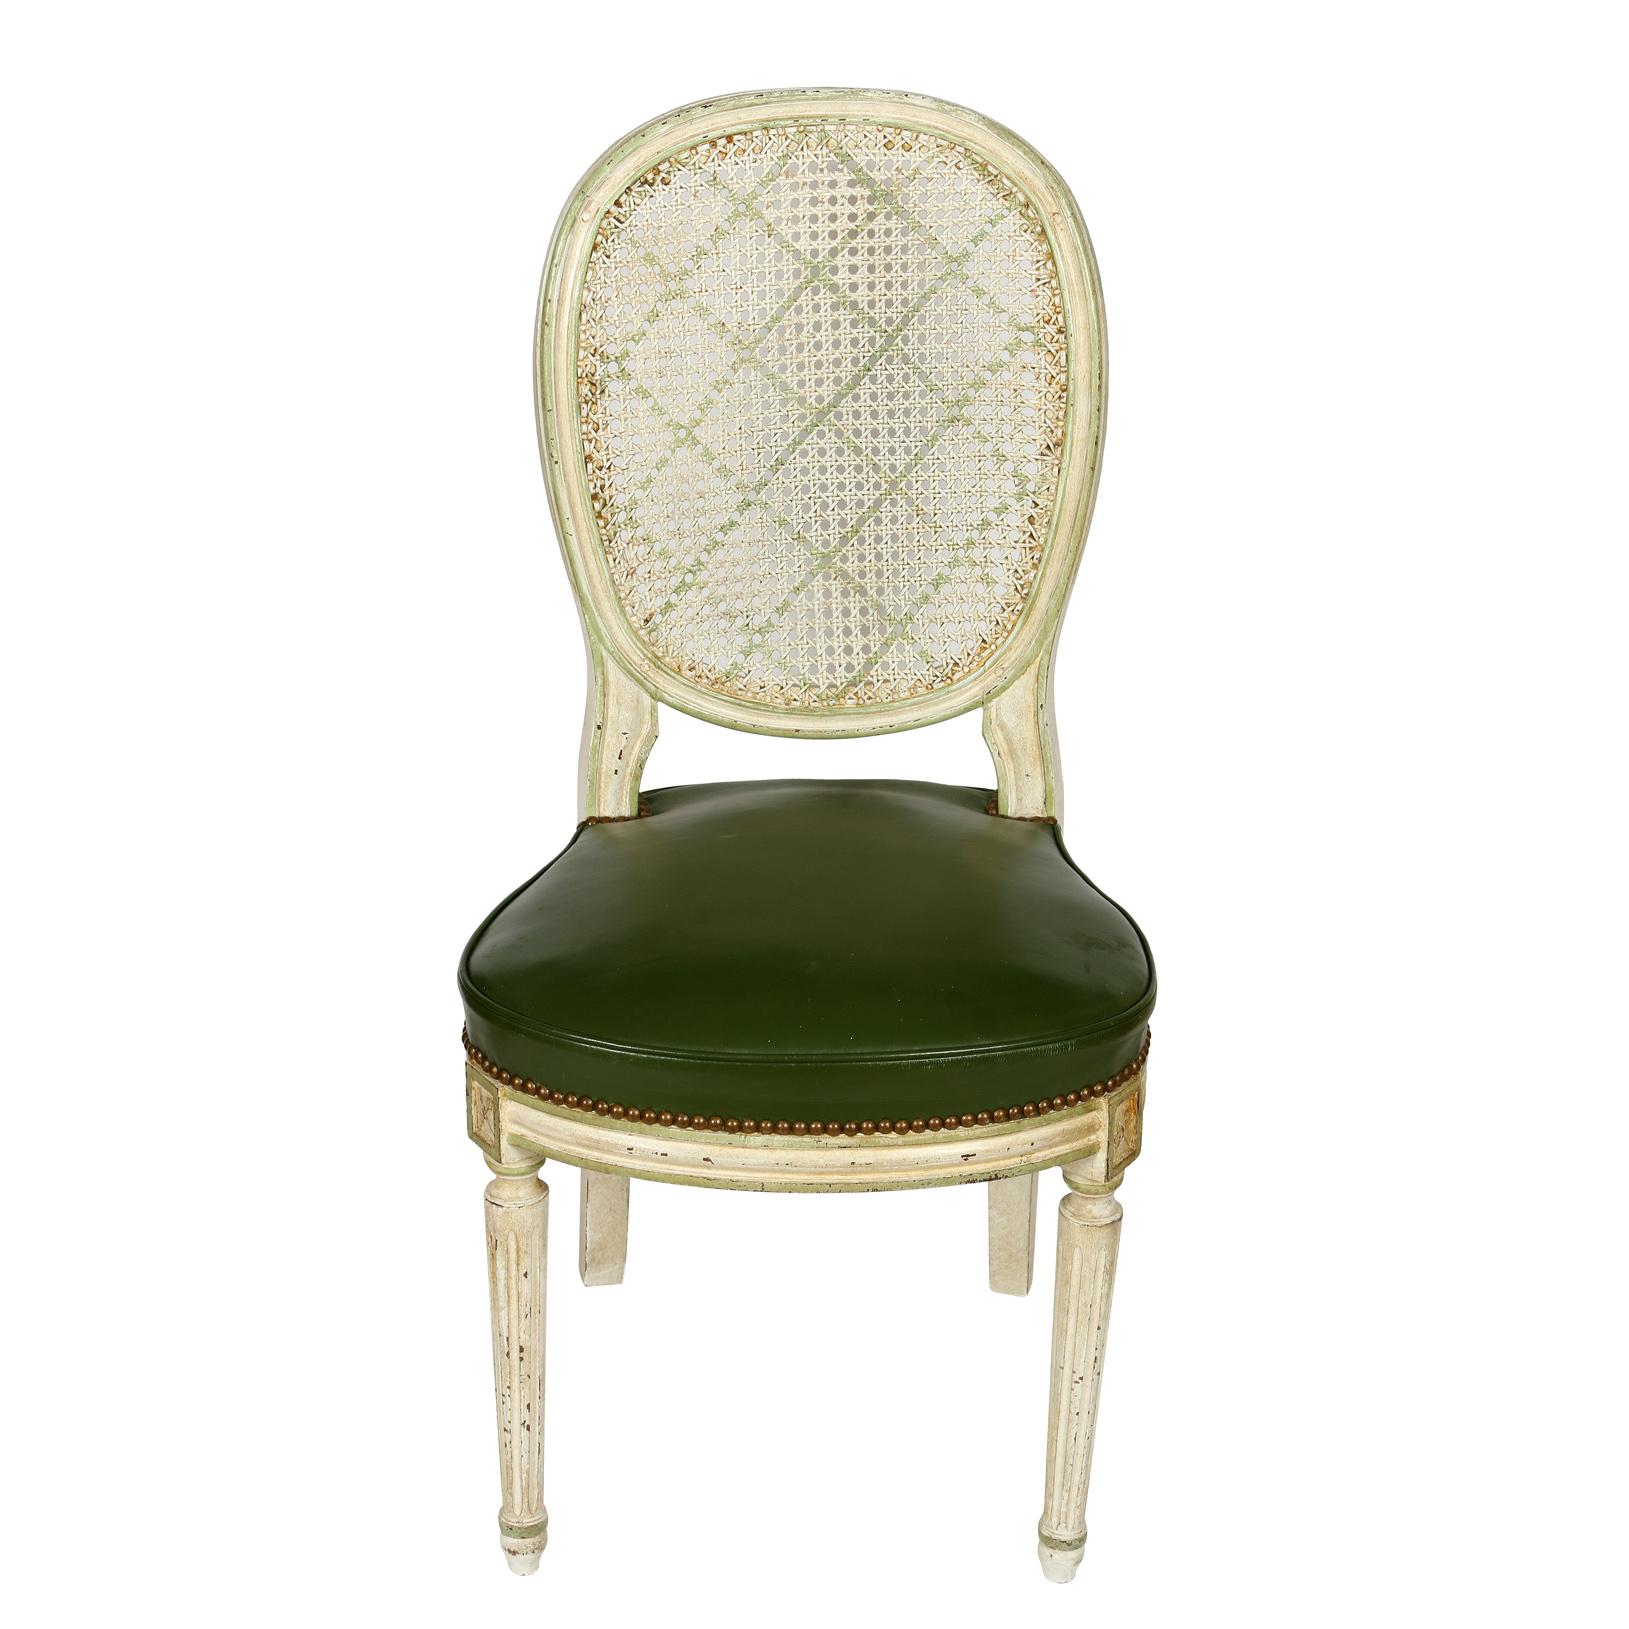 A set of six Louis XVI round, caned back dining chairs, with white painted frames, oval back with green diamond stencil pattern and green leather seats with nailhead trim.